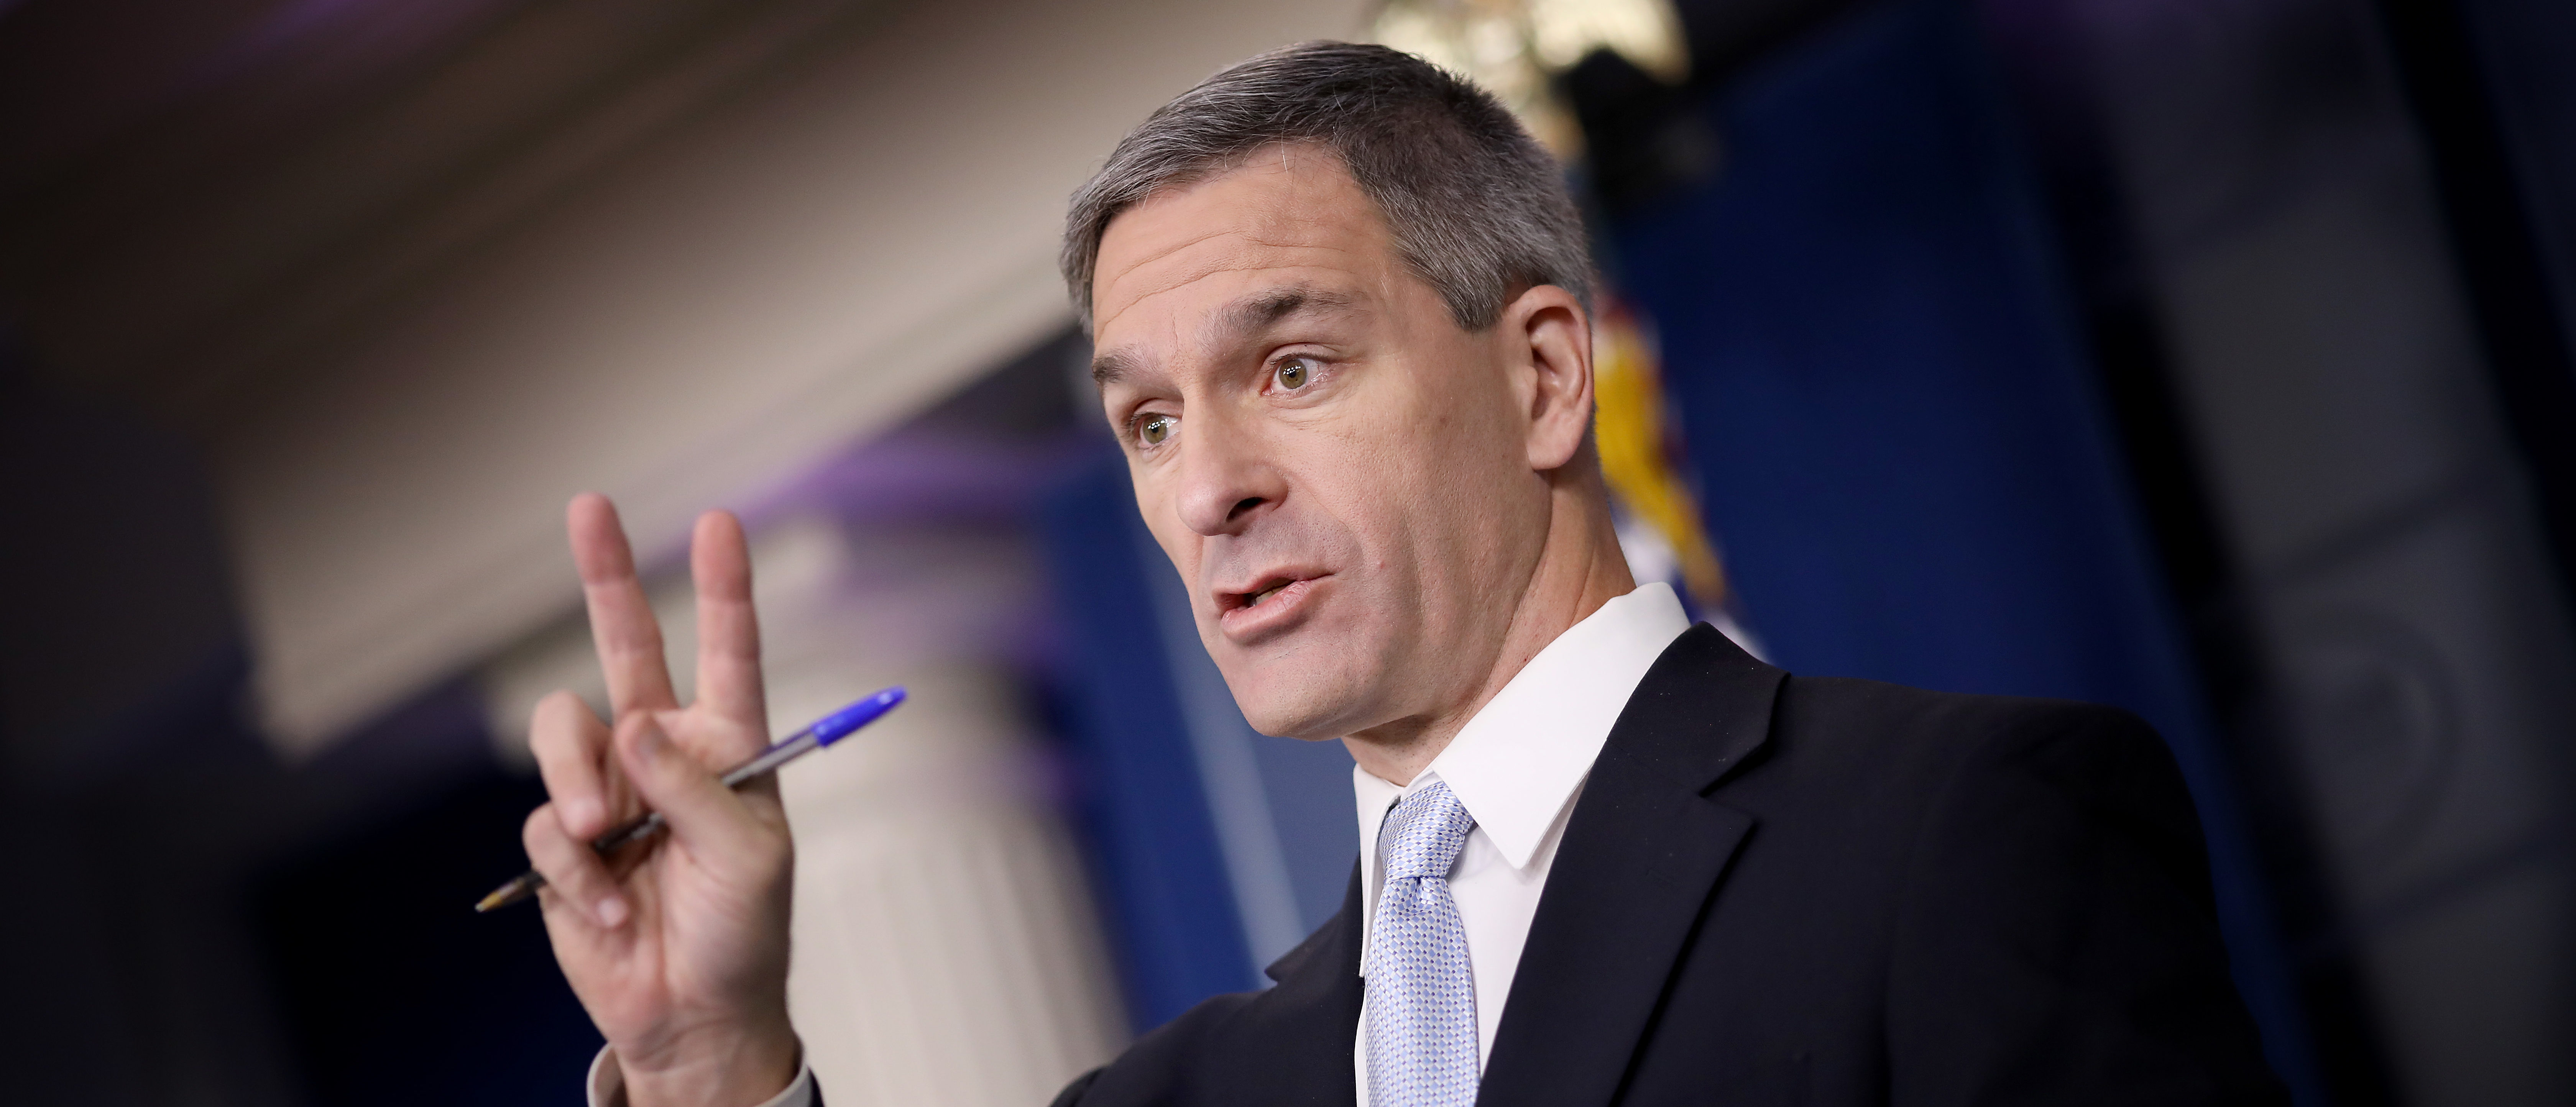 Citizenship And Immigration Acting Director Ken Cuccinelli Holds Press Briefing